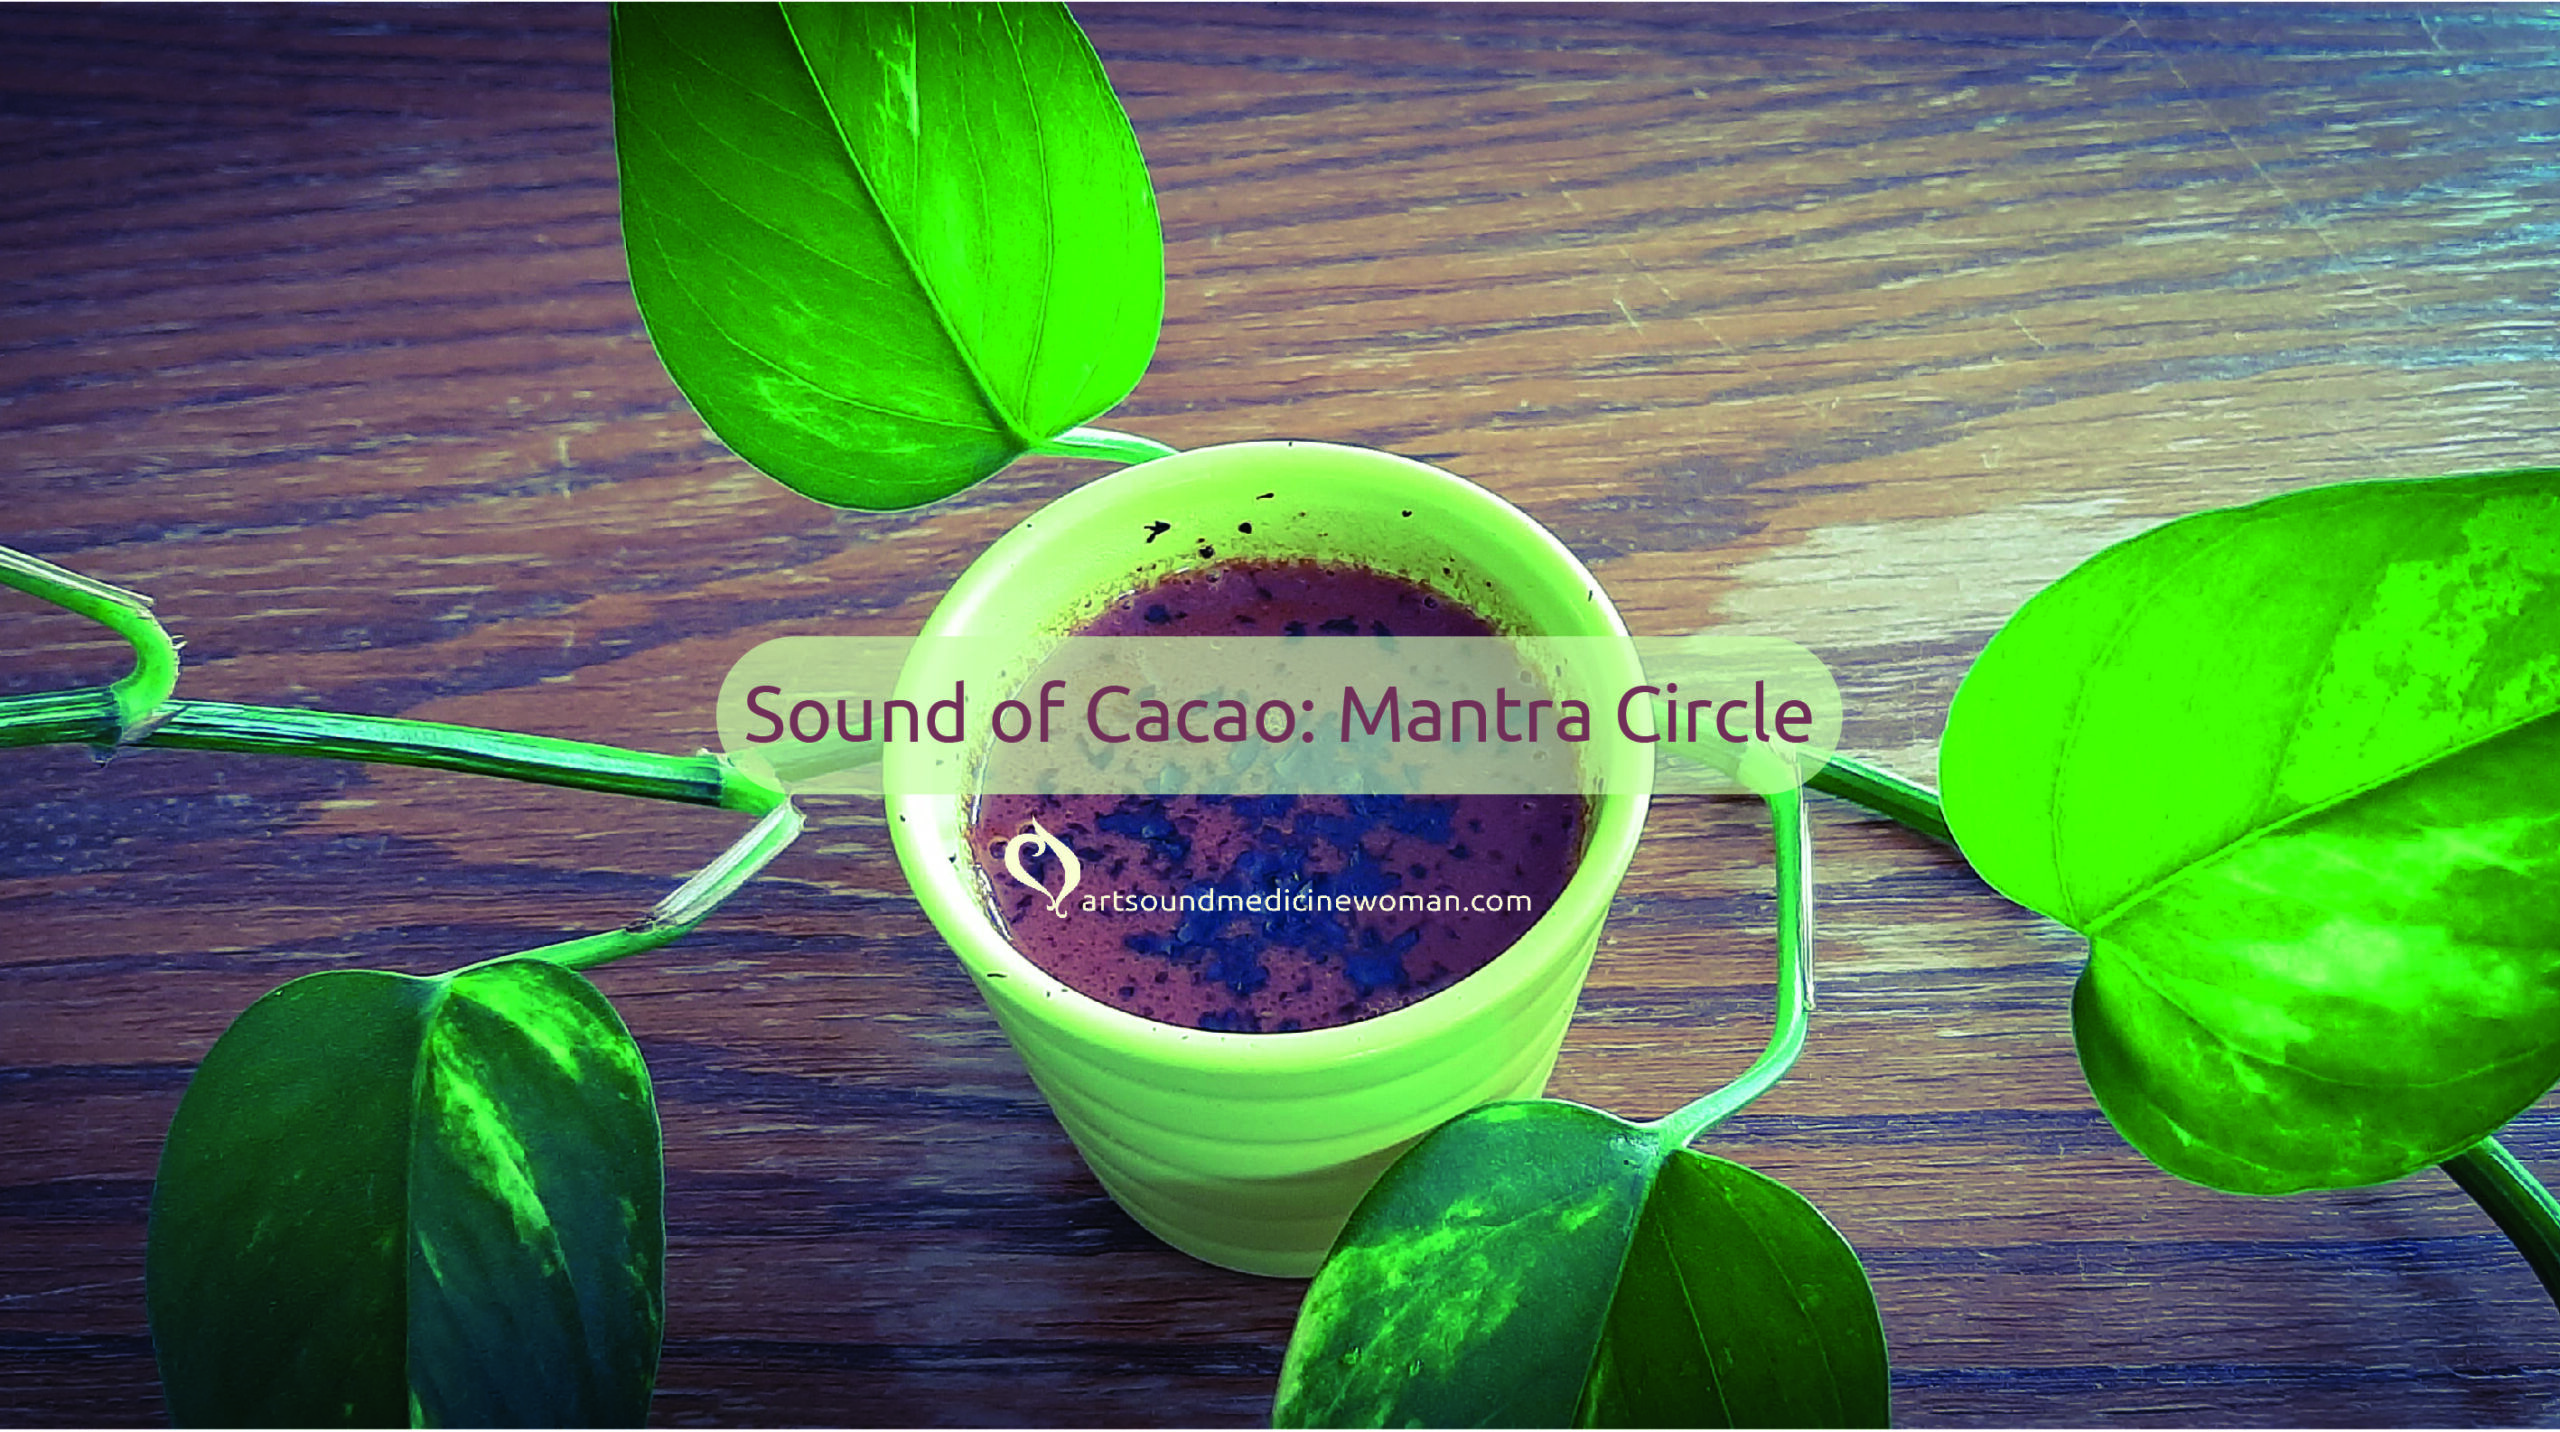 Small cup of ceremonial cacao surrounded by a vine of Pothos showing its green leaf. It is setting the atmosphere for a Sound of Cacao ceremony. Theme of the ceremony is Mantra Circle.